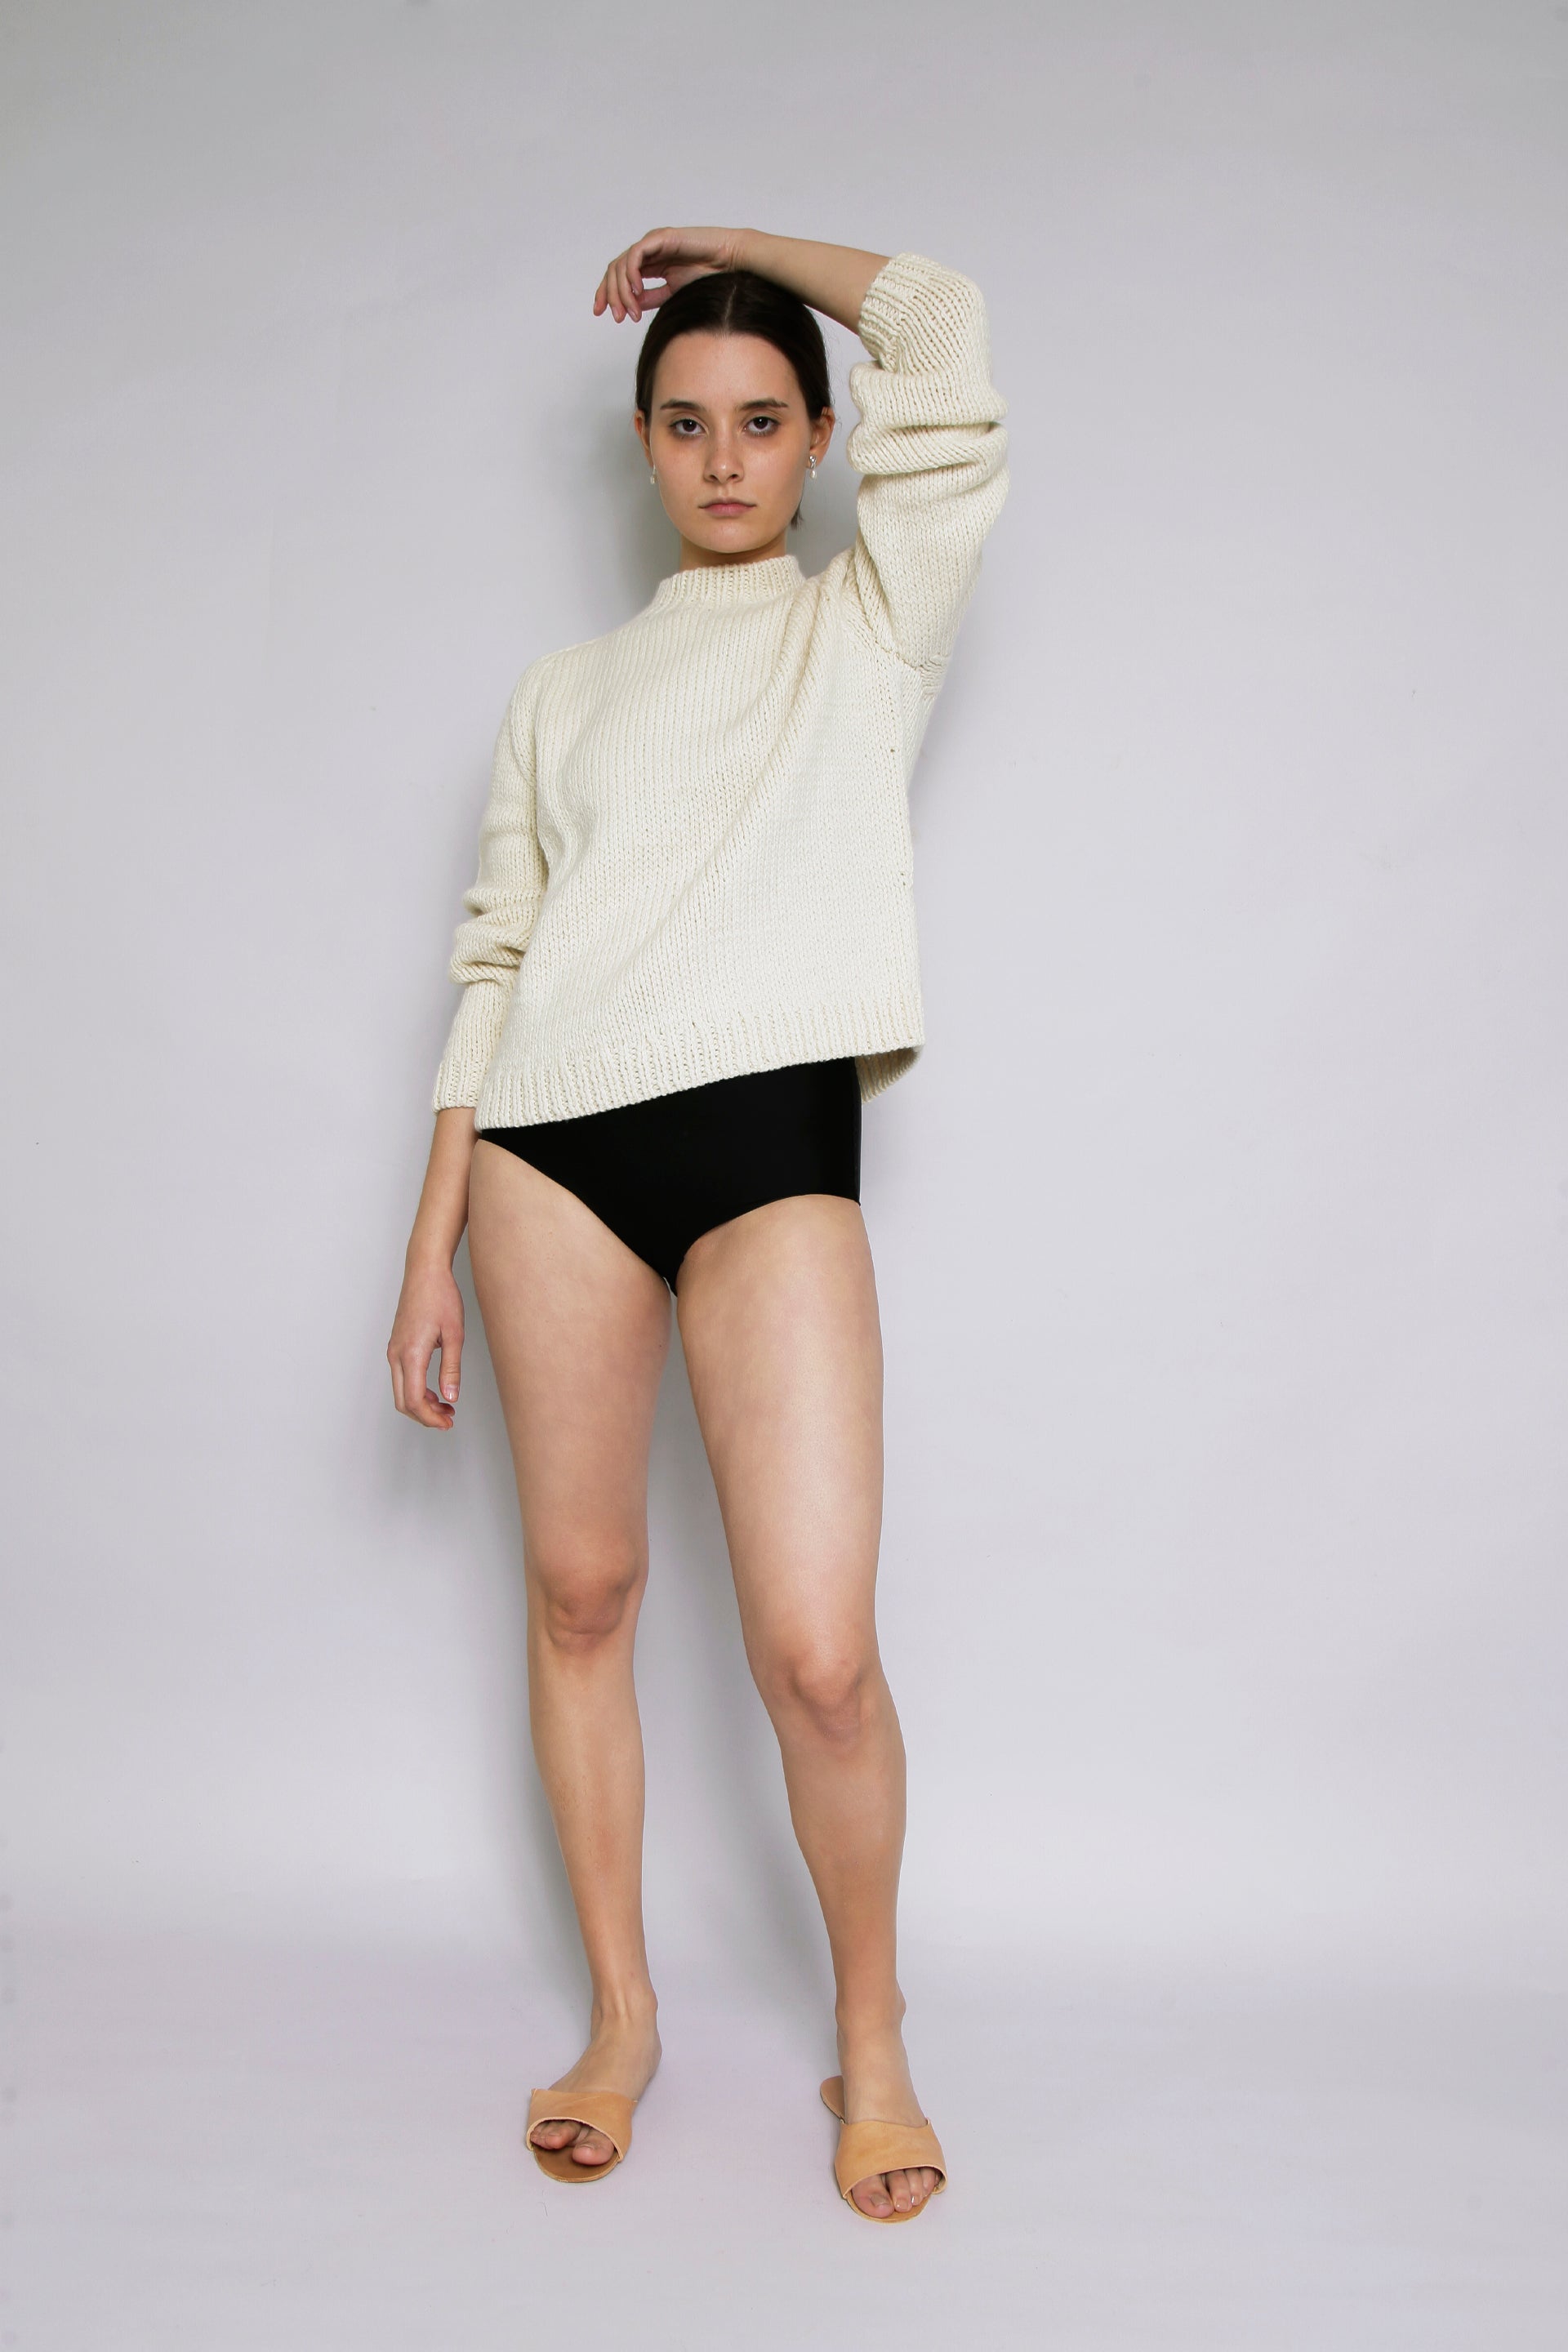 UNDYED, WOOL, HAND-KNITTED, JUMPER, SWEATER, JERSEY, STYLISH, SUSTAINABLE, HAND-CRAFTED, WOMENSWEAR